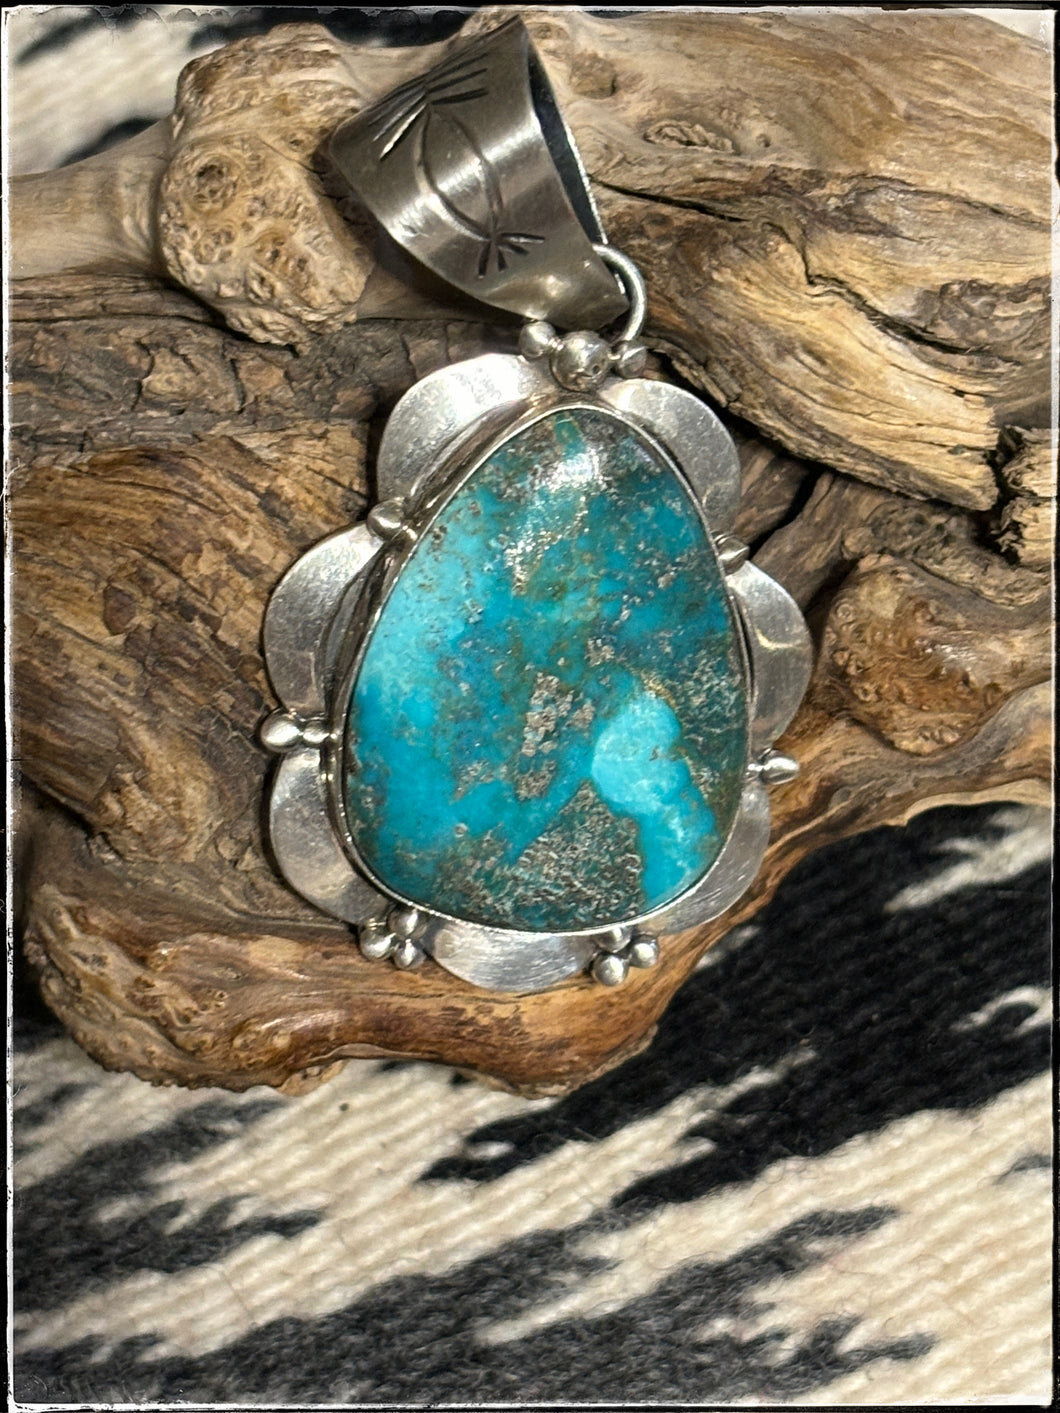 Mary Ann Spencer, Navajo silversmith. Carico Lake turquoise and sterling silver pendant. 